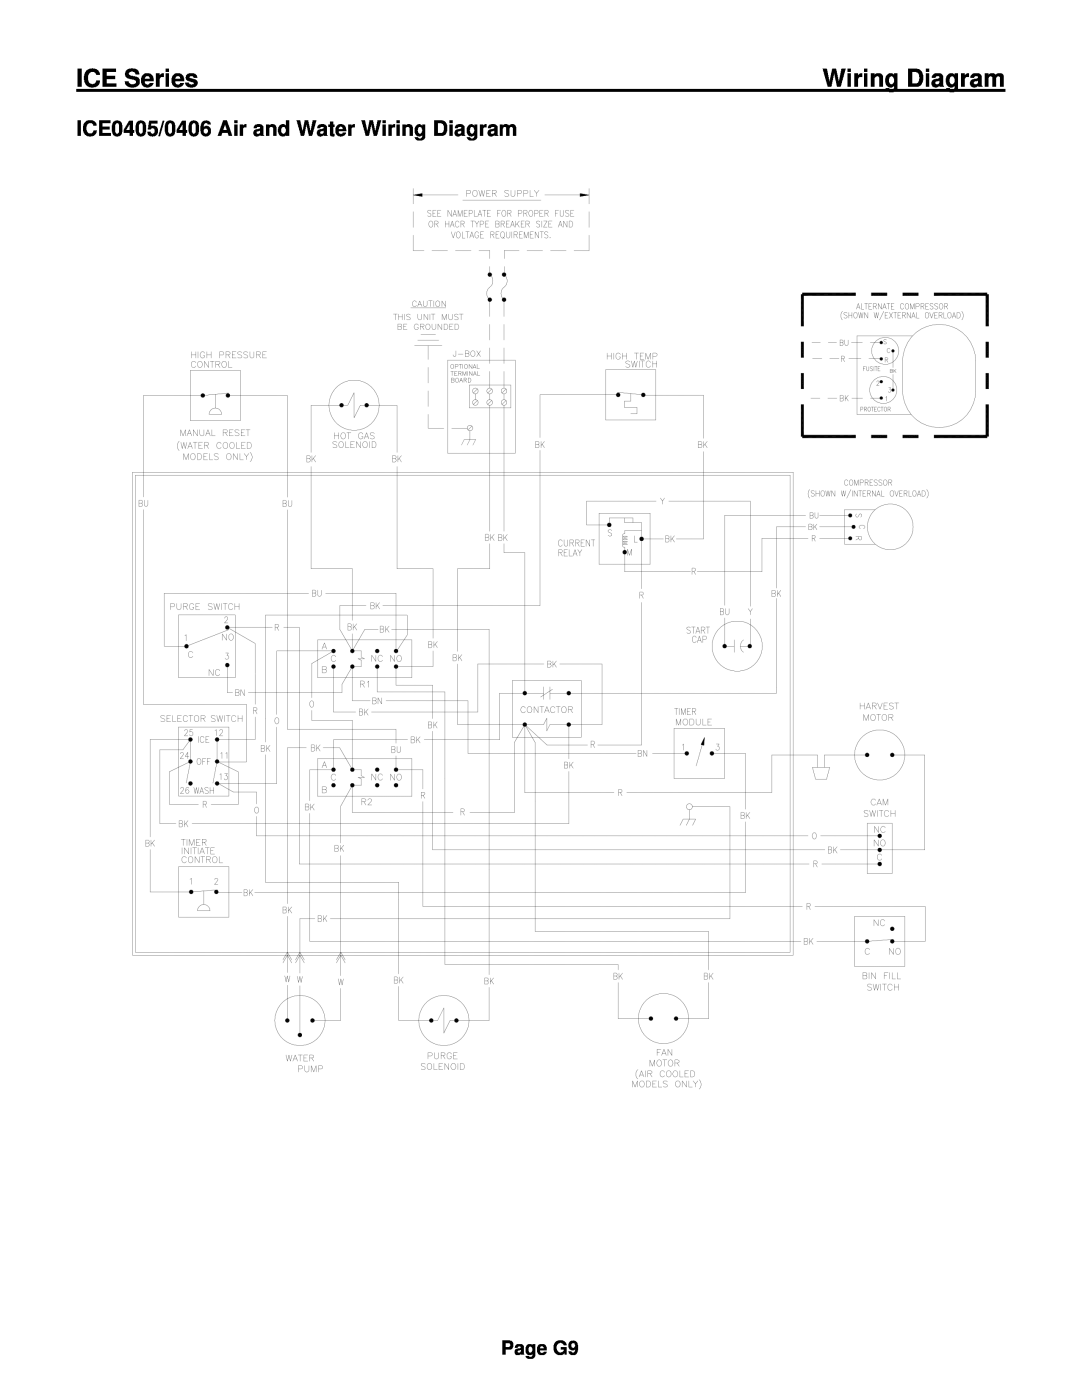 Ice-O-Matic ICE0250 Series installation manual ICE0405/0406 Air and Water Wiring Diagram, ICE Series, Page G9 